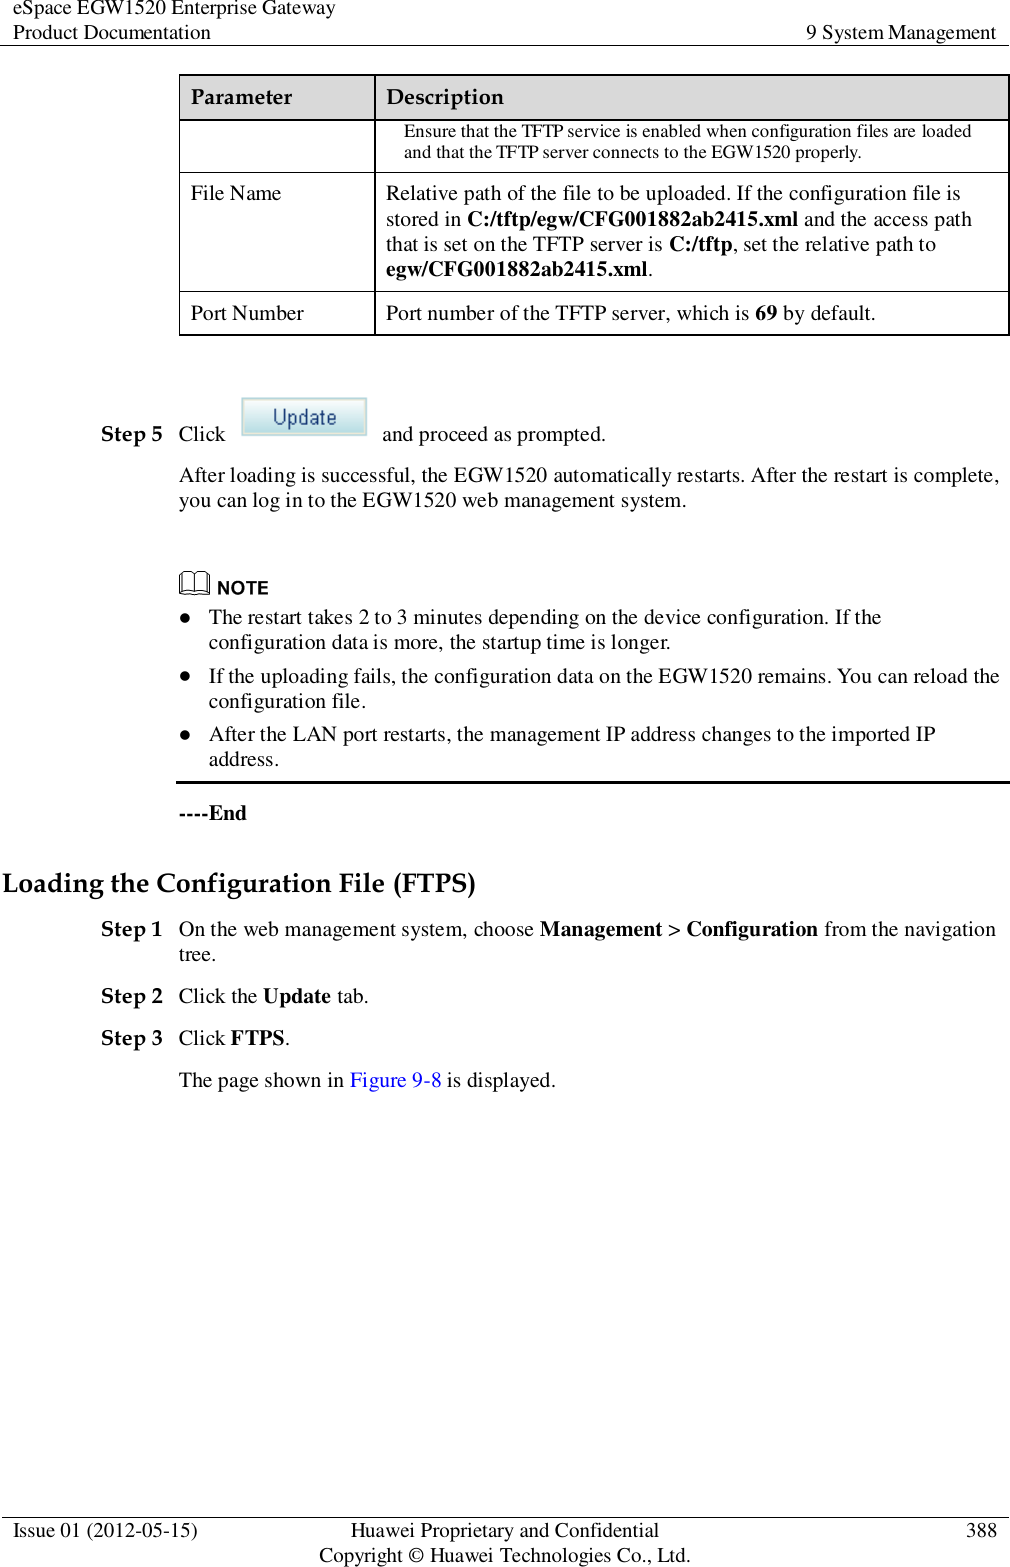 eSpace EGW1520 Enterprise Gateway Product Documentation 9 System Management  Issue 01 (2012-05-15) Huawei Proprietary and Confidential                                     Copyright © Huawei Technologies Co., Ltd. 388  Parameter Description Ensure that the TFTP service is enabled when configuration files are loaded and that the TFTP server connects to the EGW1520 properly. File Name Relative path of the file to be uploaded. If the configuration file is stored in C:/tftp/egw/CFG001882ab2415.xml and the access path that is set on the TFTP server is C:/tftp, set the relative path to egw/CFG001882ab2415.xml. Port Number Port number of the TFTP server, which is 69 by default.  Step 5 Click    and proceed as prompted. After loading is successful, the EGW1520 automatically restarts. After the restart is complete, you can log in to the EGW1520 web management system.    The restart takes 2 to 3 minutes depending on the device configuration. If the configuration data is more, the startup time is longer.  If the uploading fails, the configuration data on the EGW1520 remains. You can reload the configuration file.  After the LAN port restarts, the management IP address changes to the imported IP address. ----End Loading the Configuration File (FTPS) Step 1 On the web management system, choose Management &gt; Configuration from the navigation tree. Step 2 Click the Update tab. Step 3 Click FTPS. The page shown in Figure 9-8 is displayed. 